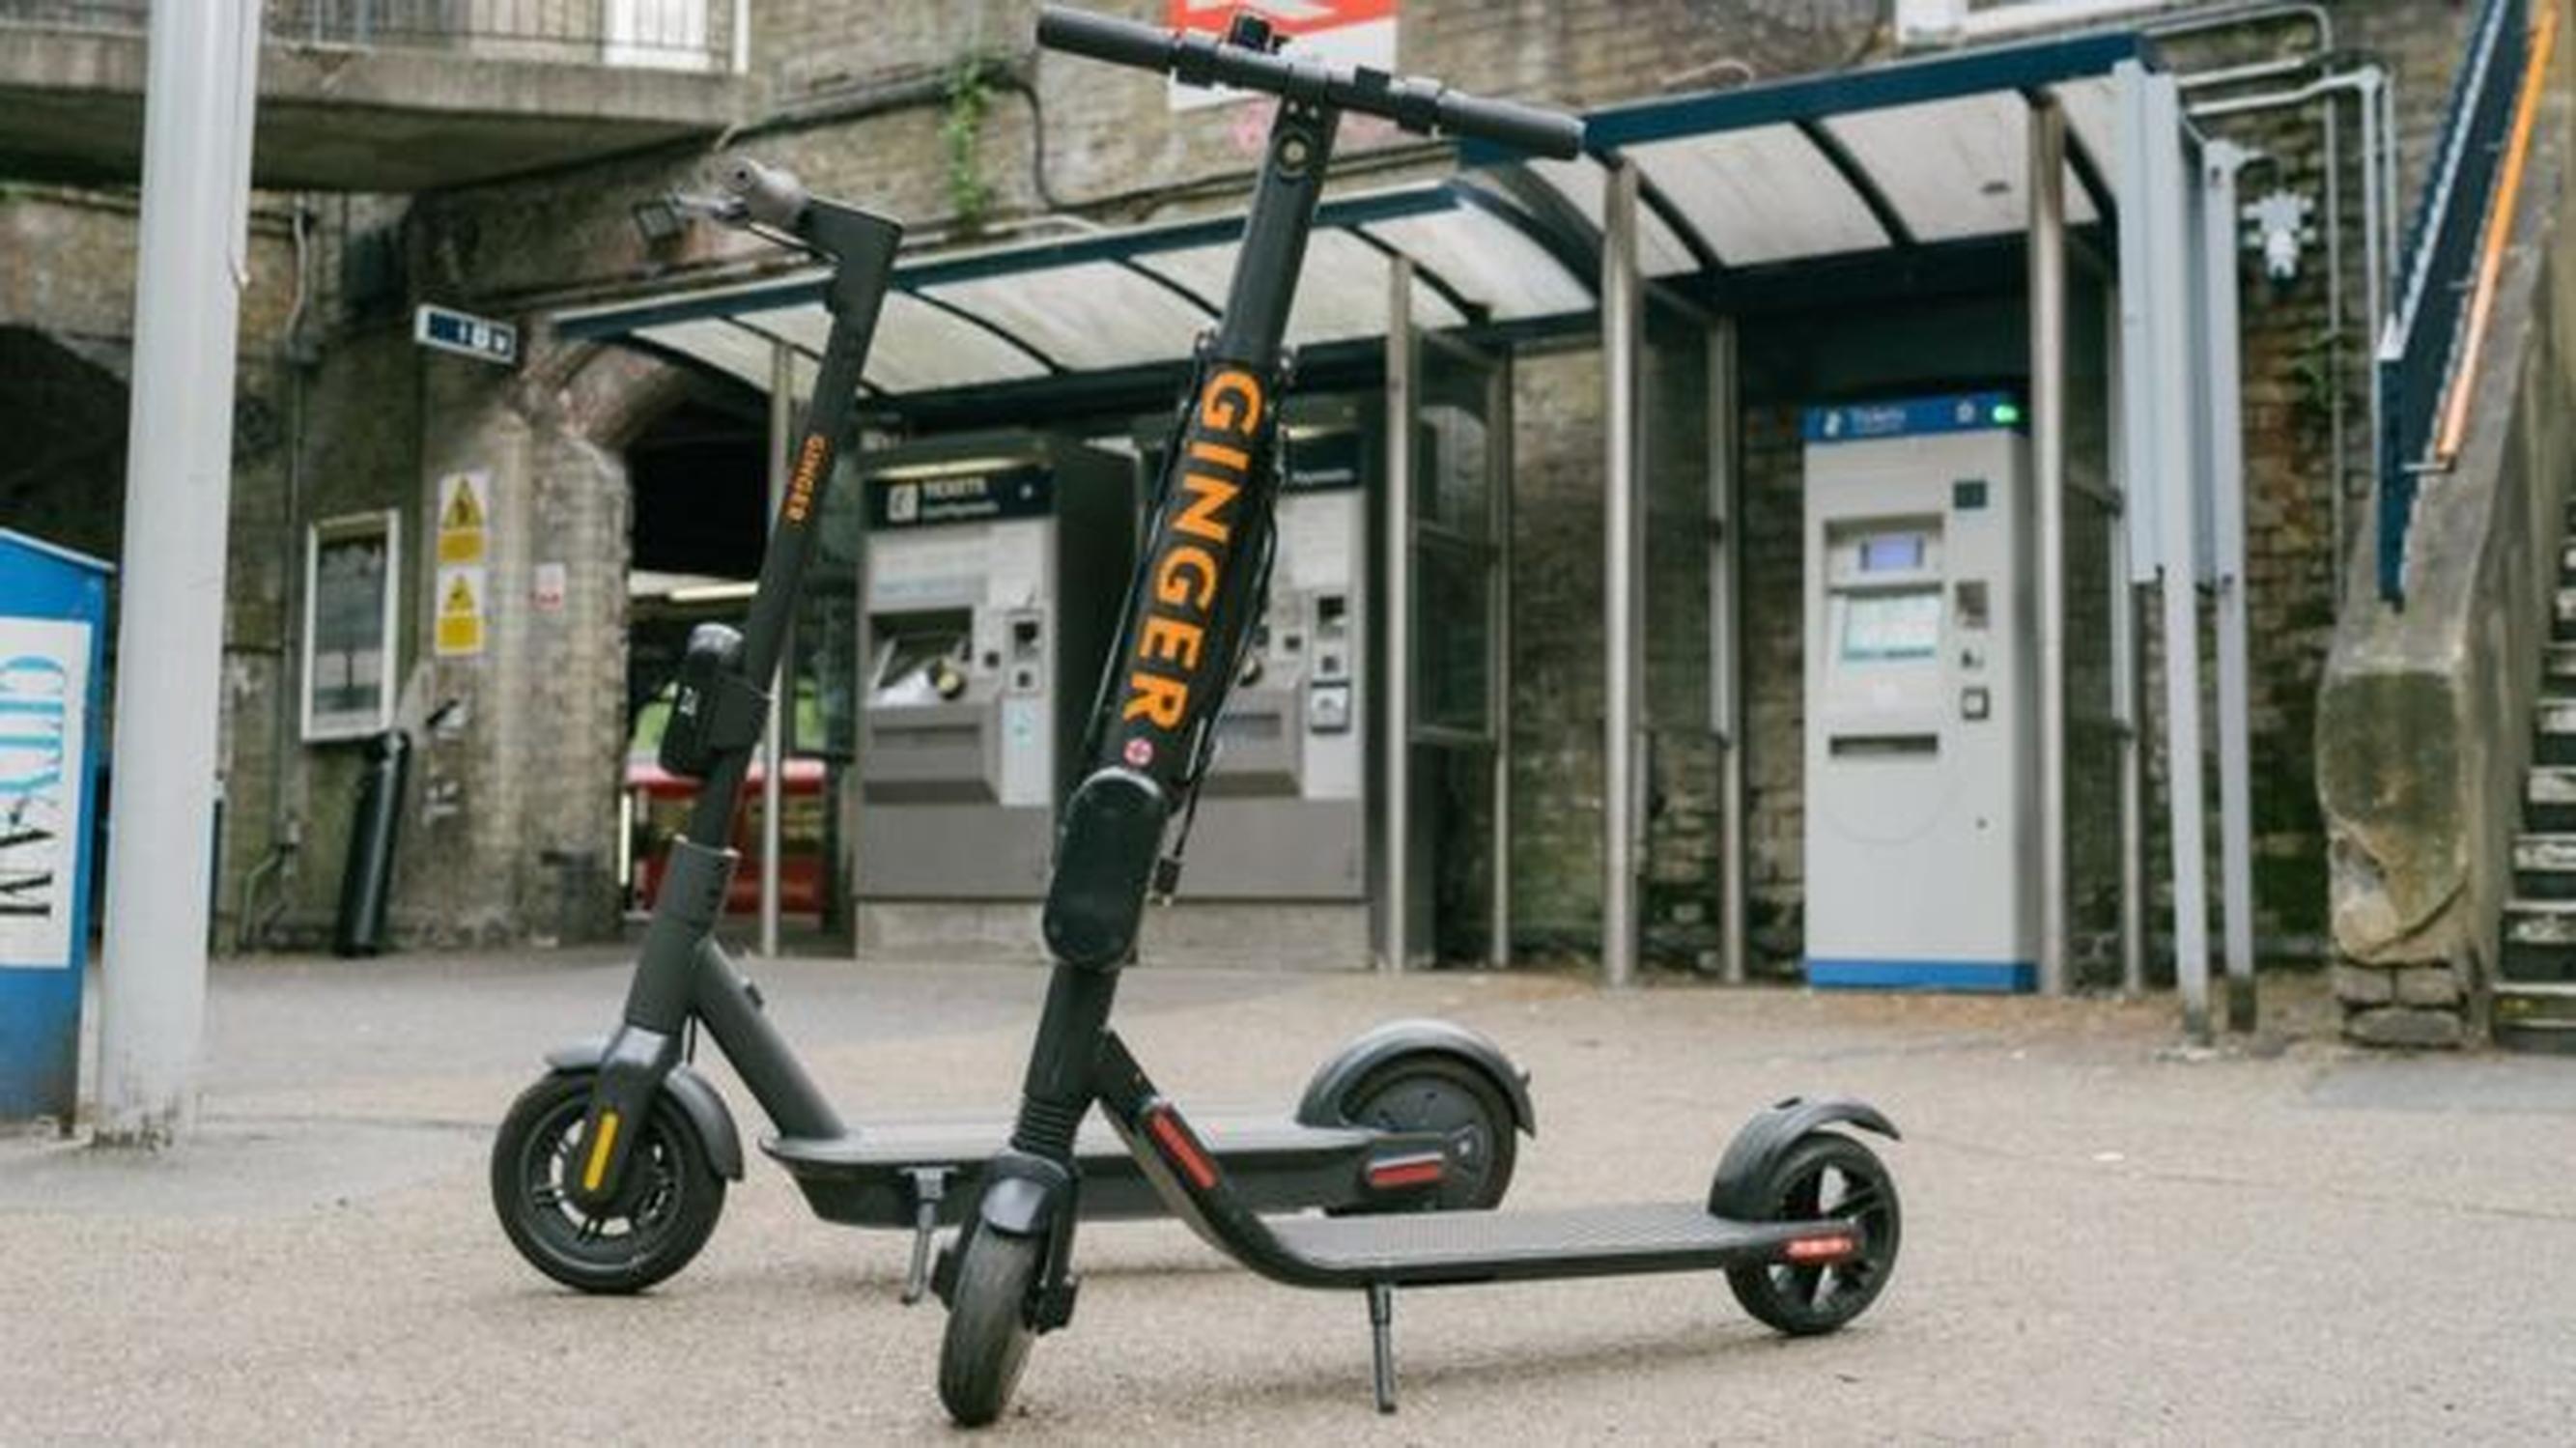 Britain’s first e-scooter rental trial was launched in Middlesbrough by Tees Valley Combined Authority in partnership with Ginger